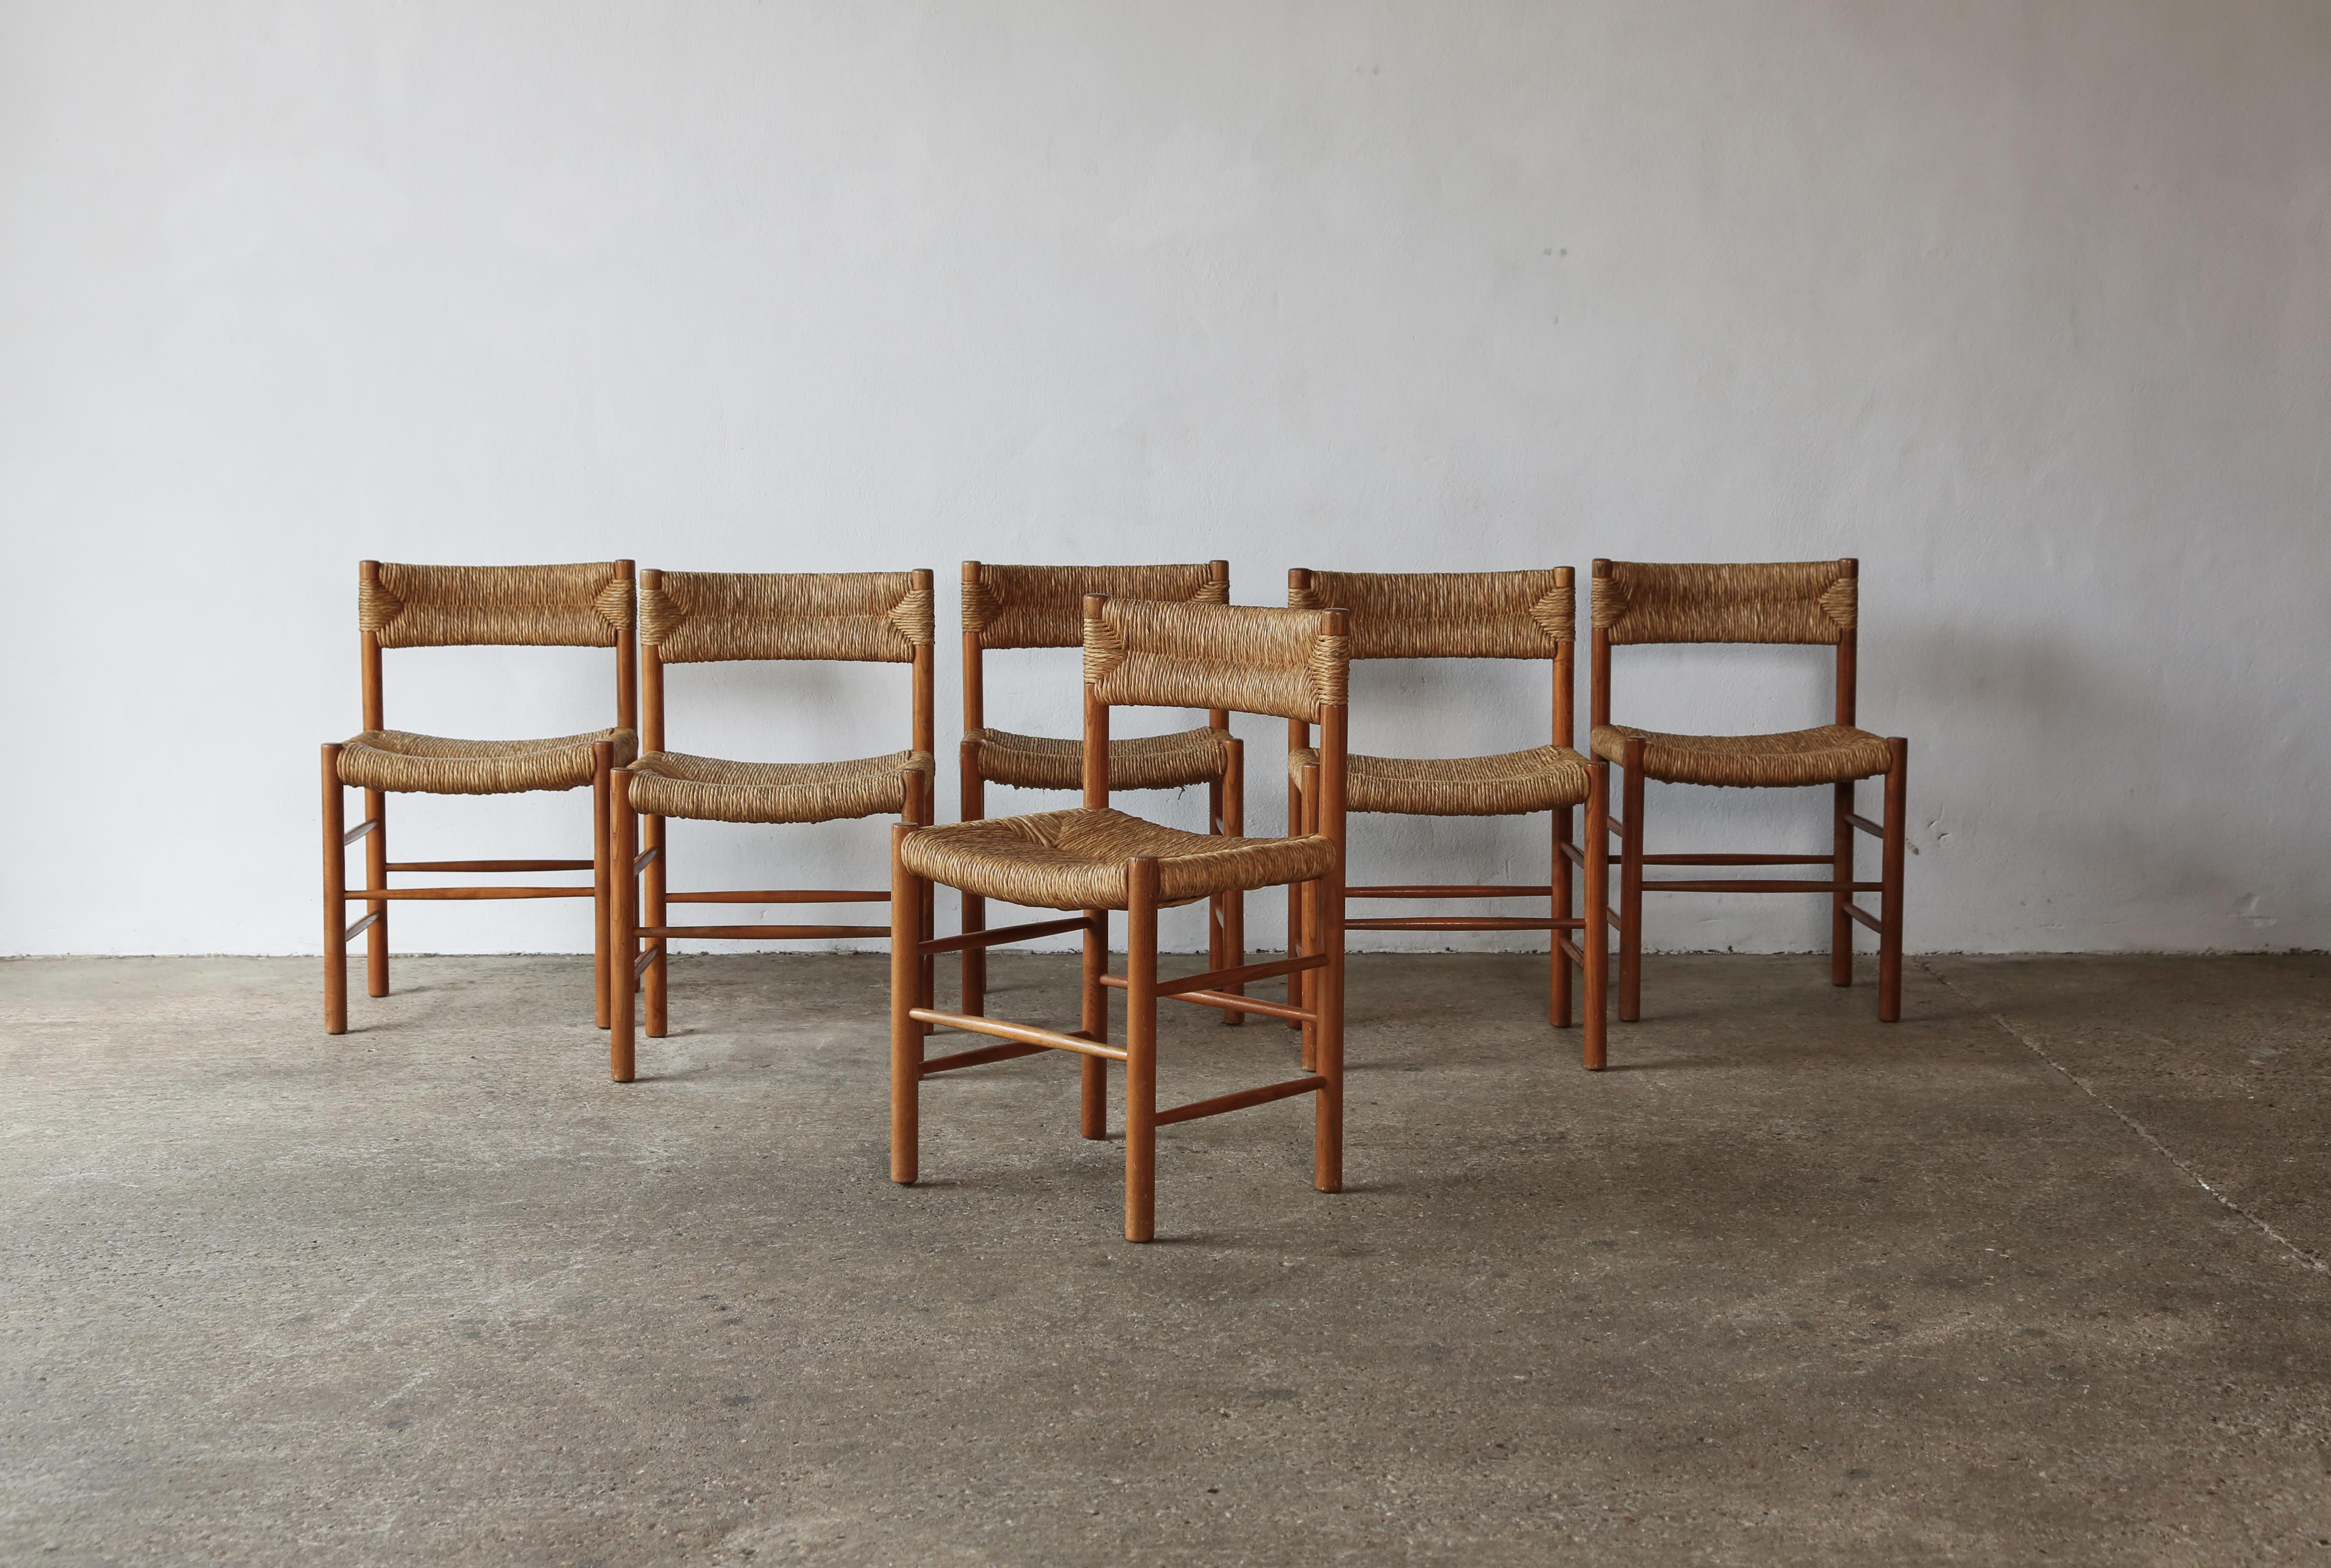 A set of six original Charlotte Perriand / Robert Sentou Dordogne chairs, France, 1960s. Wooden frames in original condition, good structural condition, with minor signs of use and wear relative to age. Original rush seats and backs in good